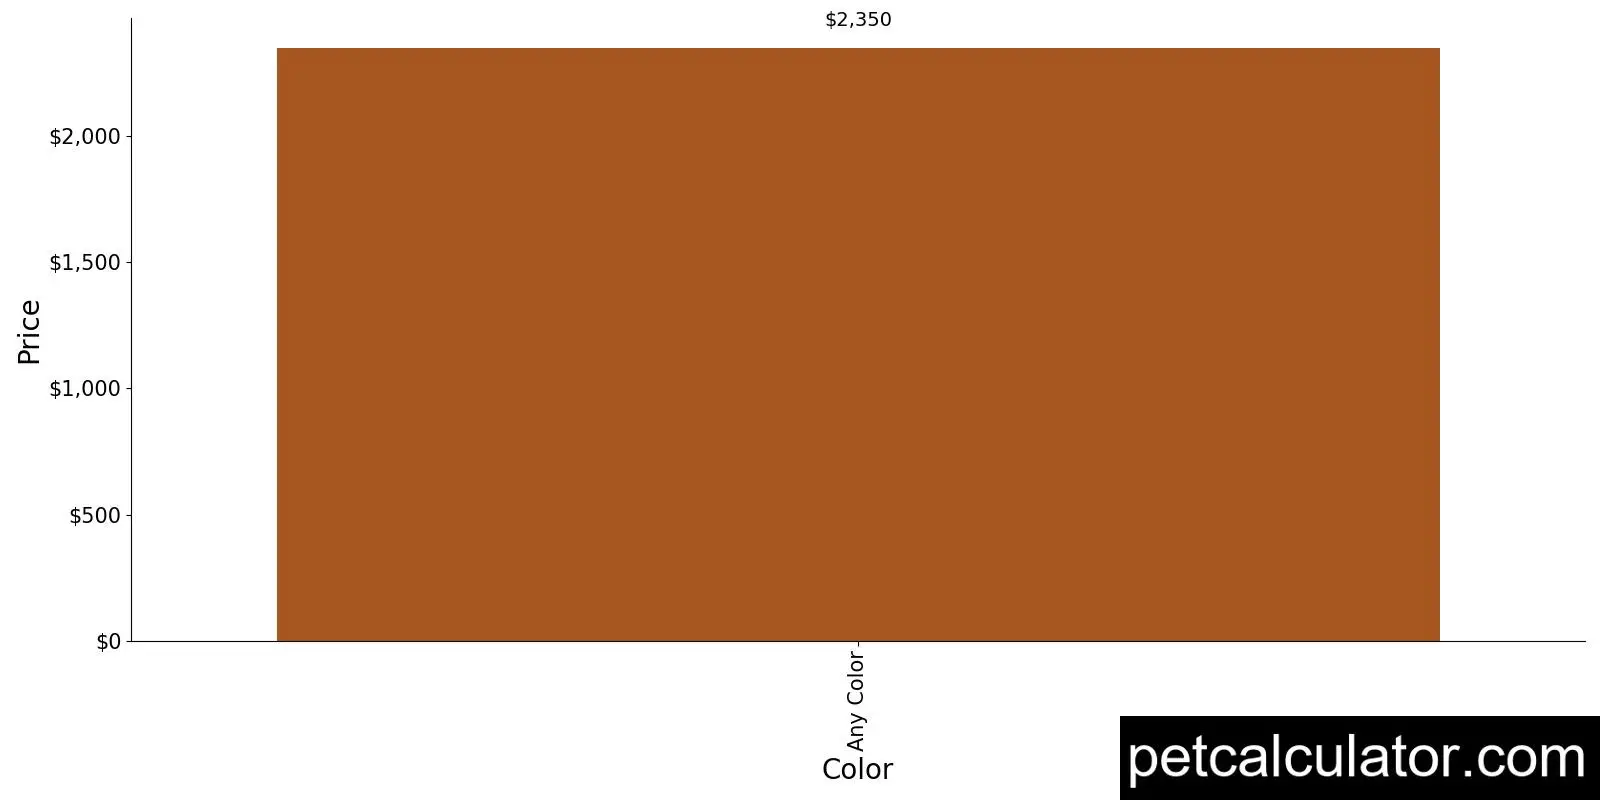 Price of Berger Picard by Color 